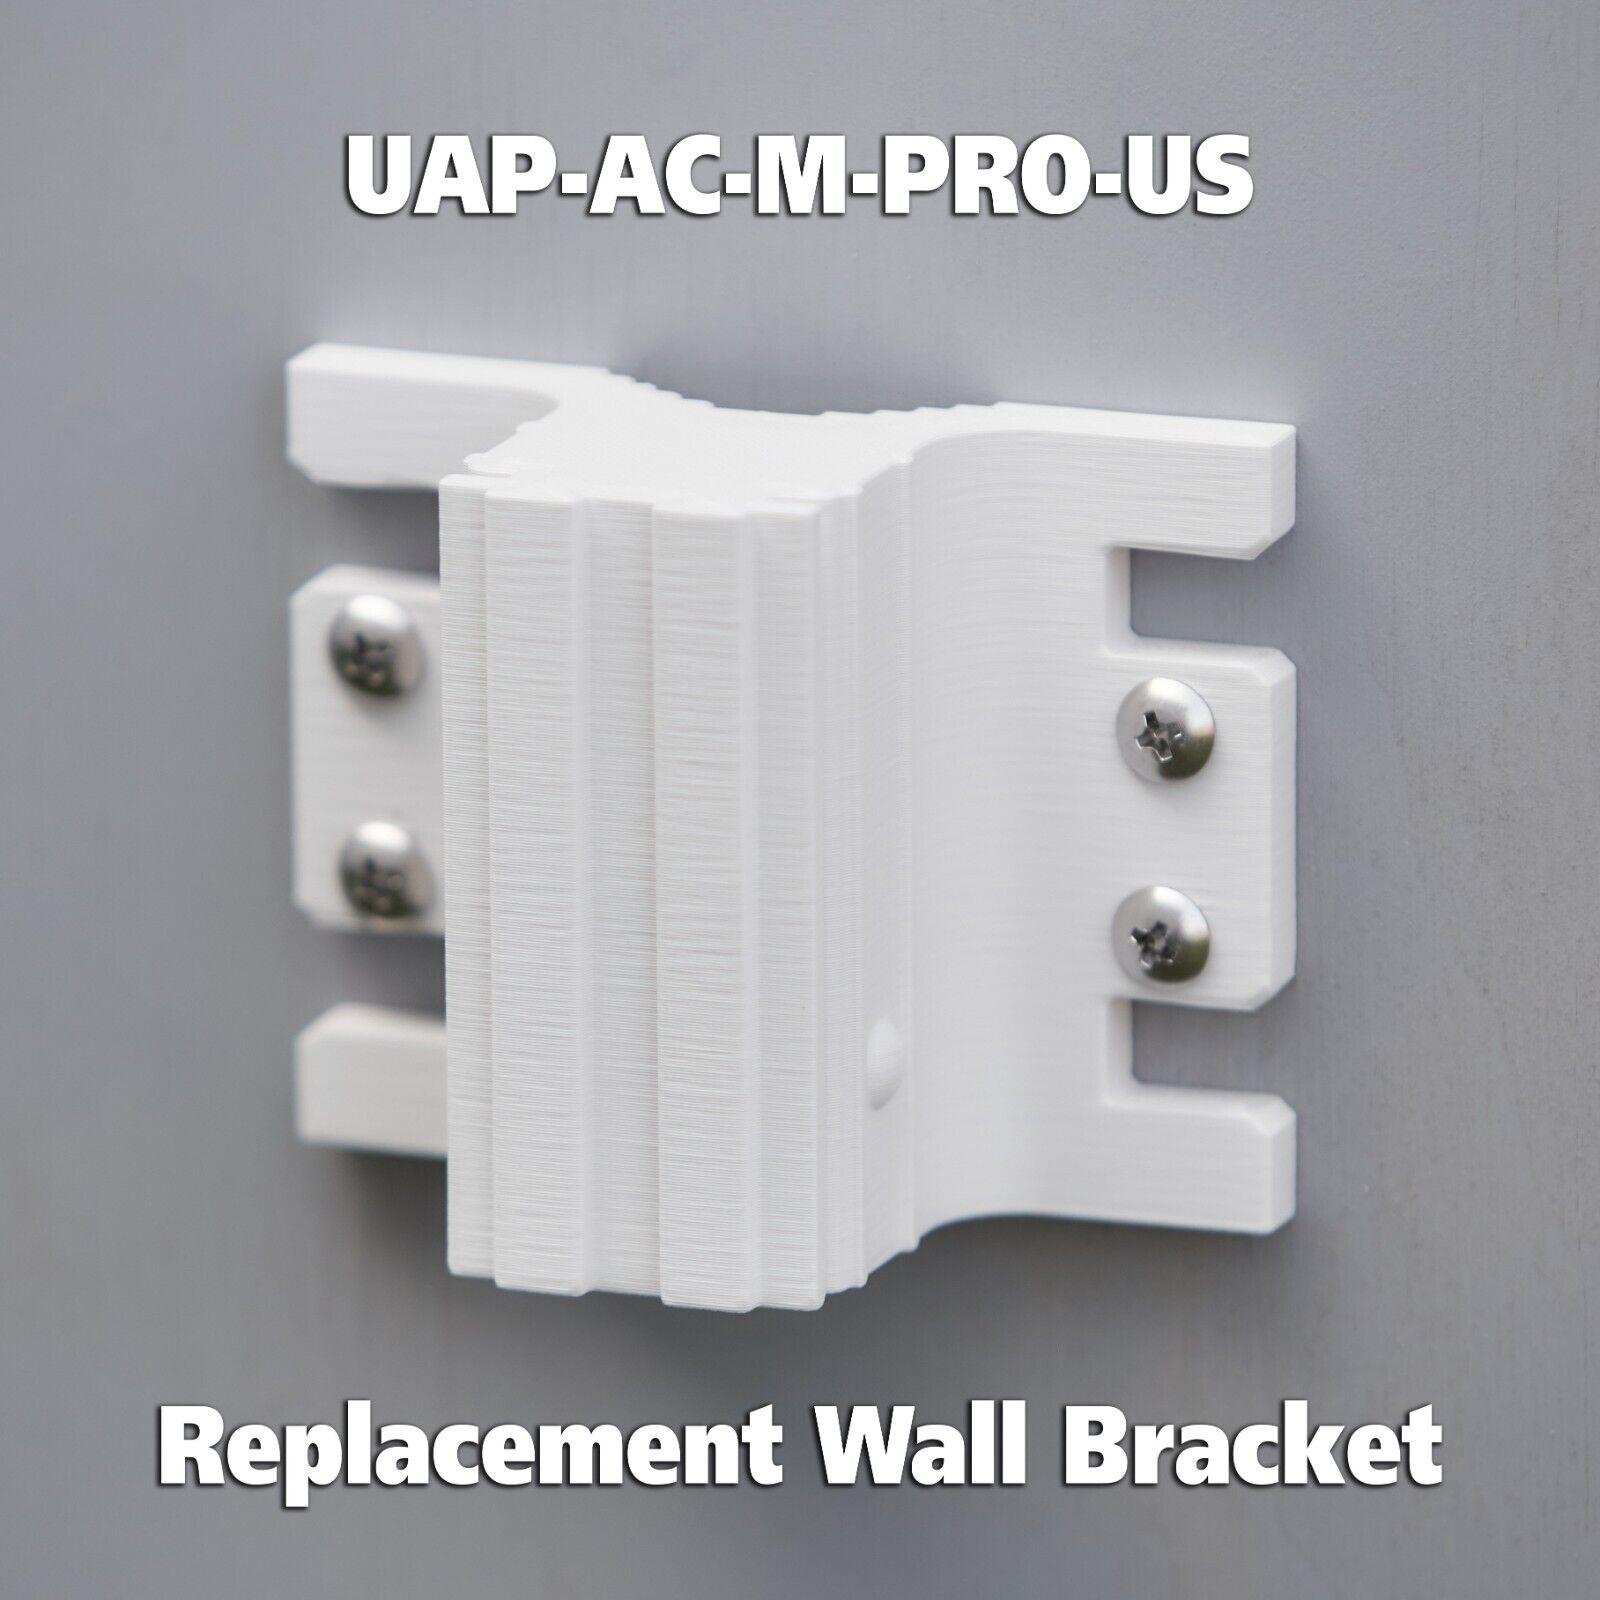 For Ubiquiti UAP-AC-M-PRO-US UAP-AC UAP-AC Outdoor WiFi Replacement Wall Bracket